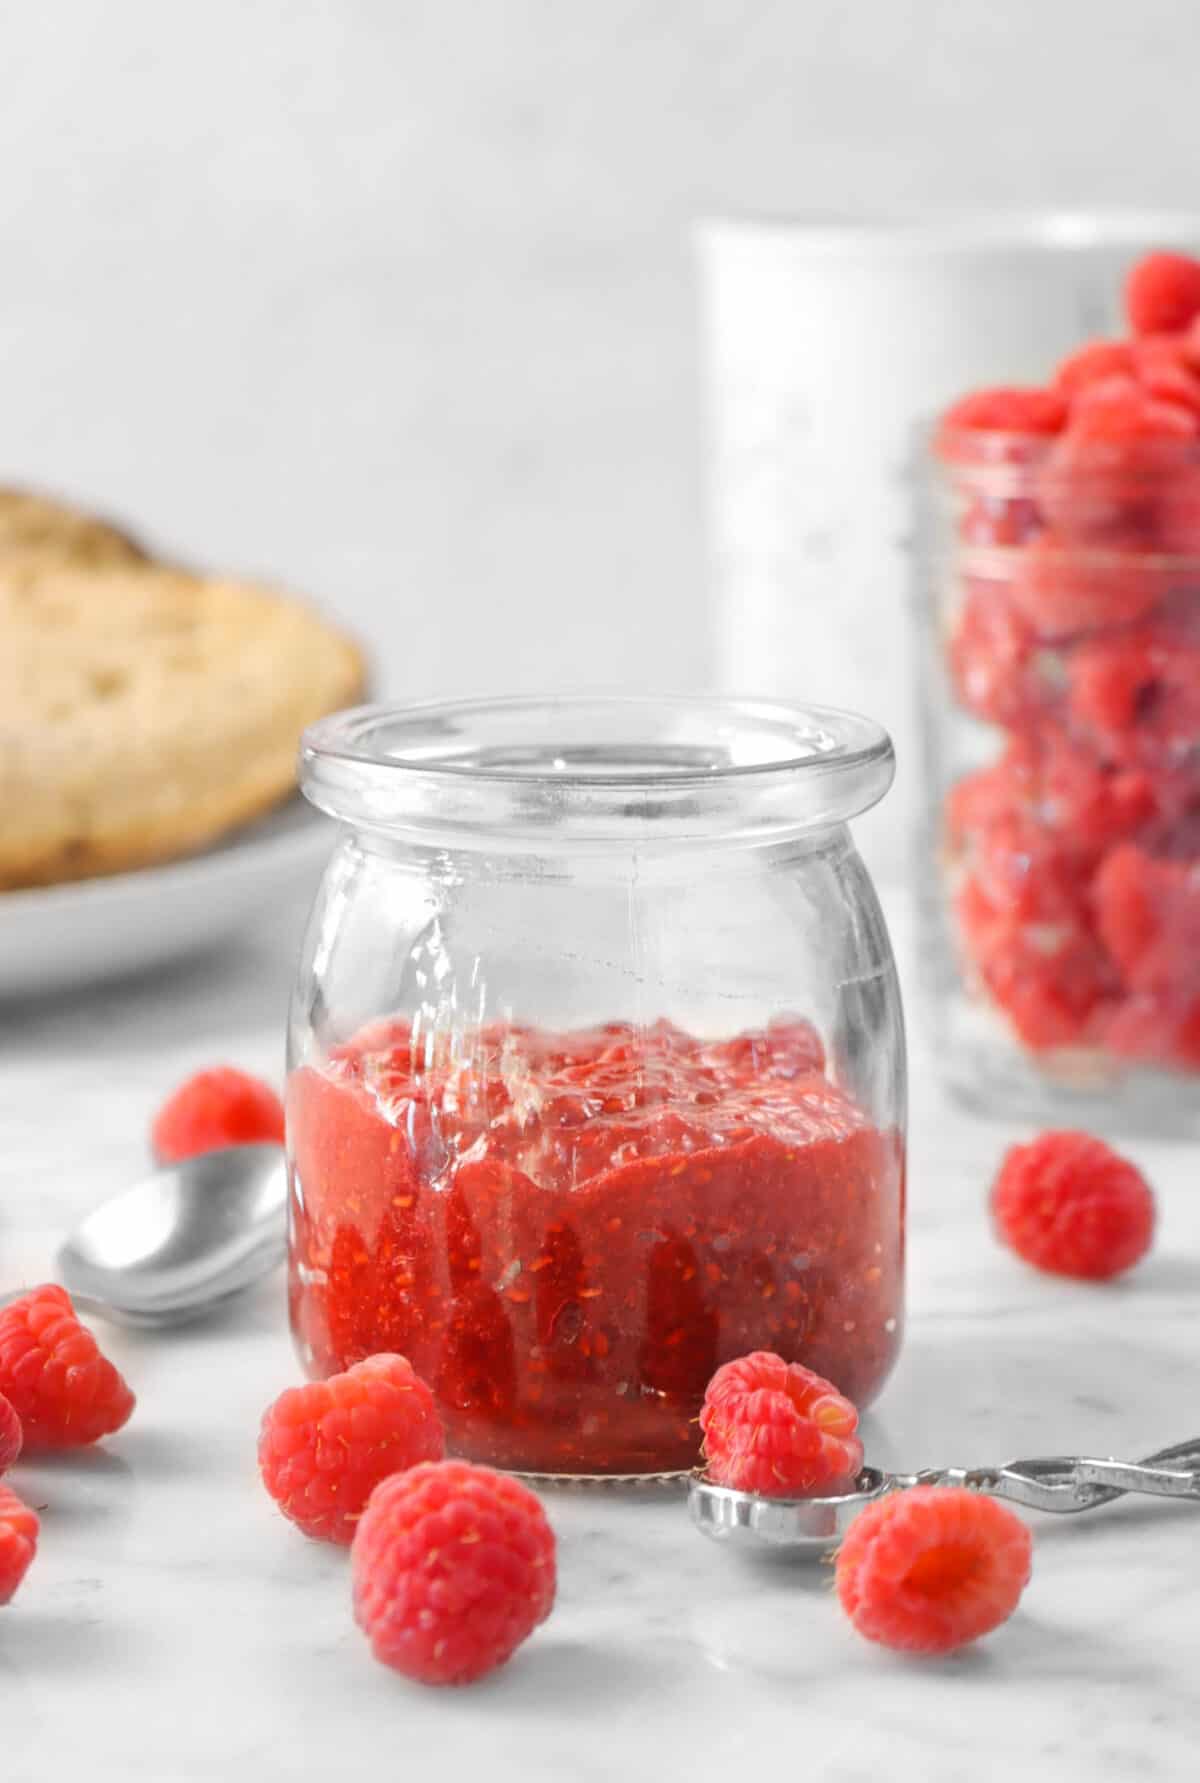 a jar of raspberry jam with two spoons, fresh raspberries, and toast